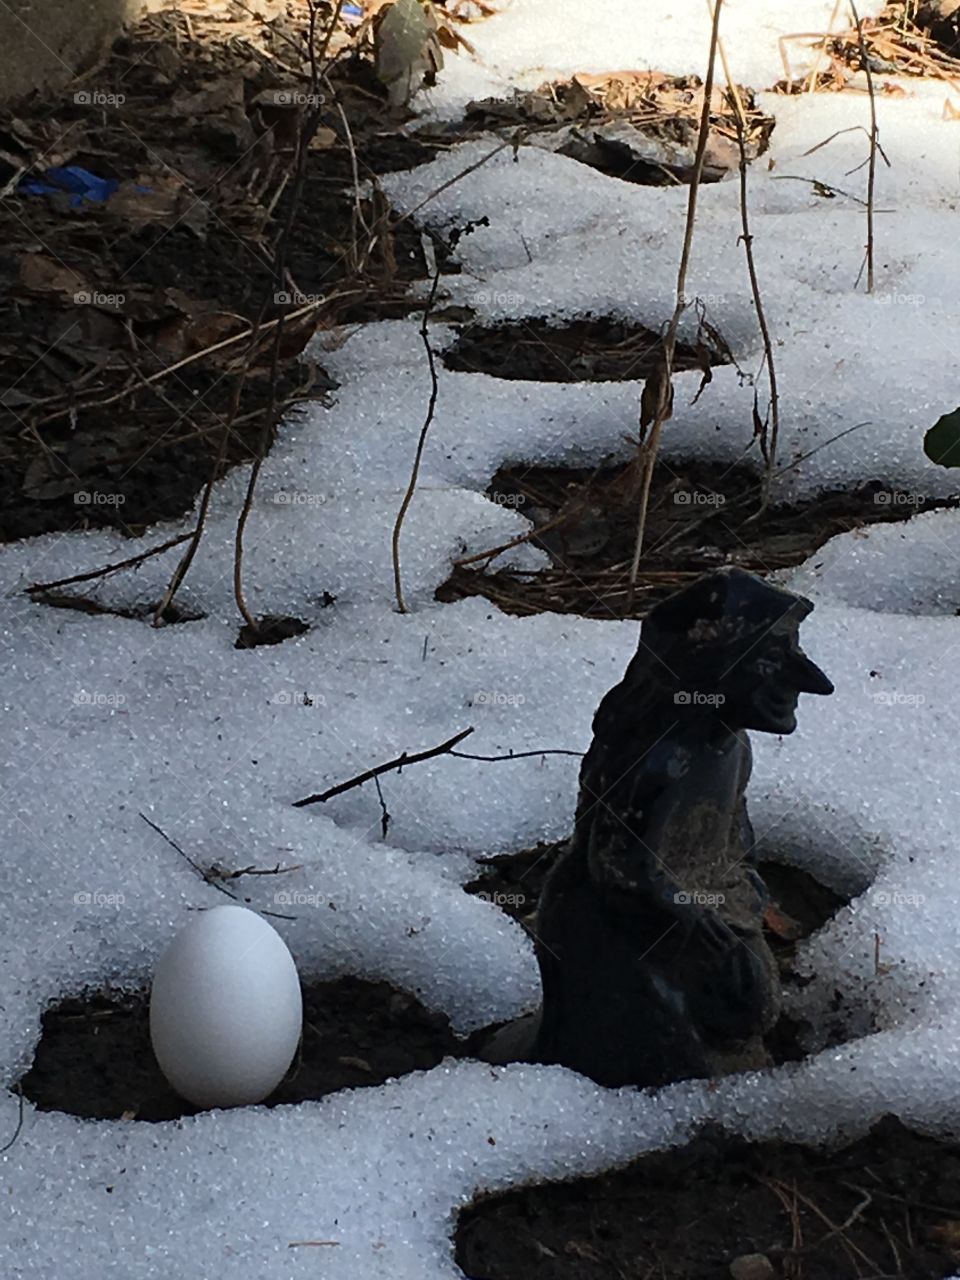 Out with the old, in with the new.  A balanced egg next to a crone figurine in icy snow. 